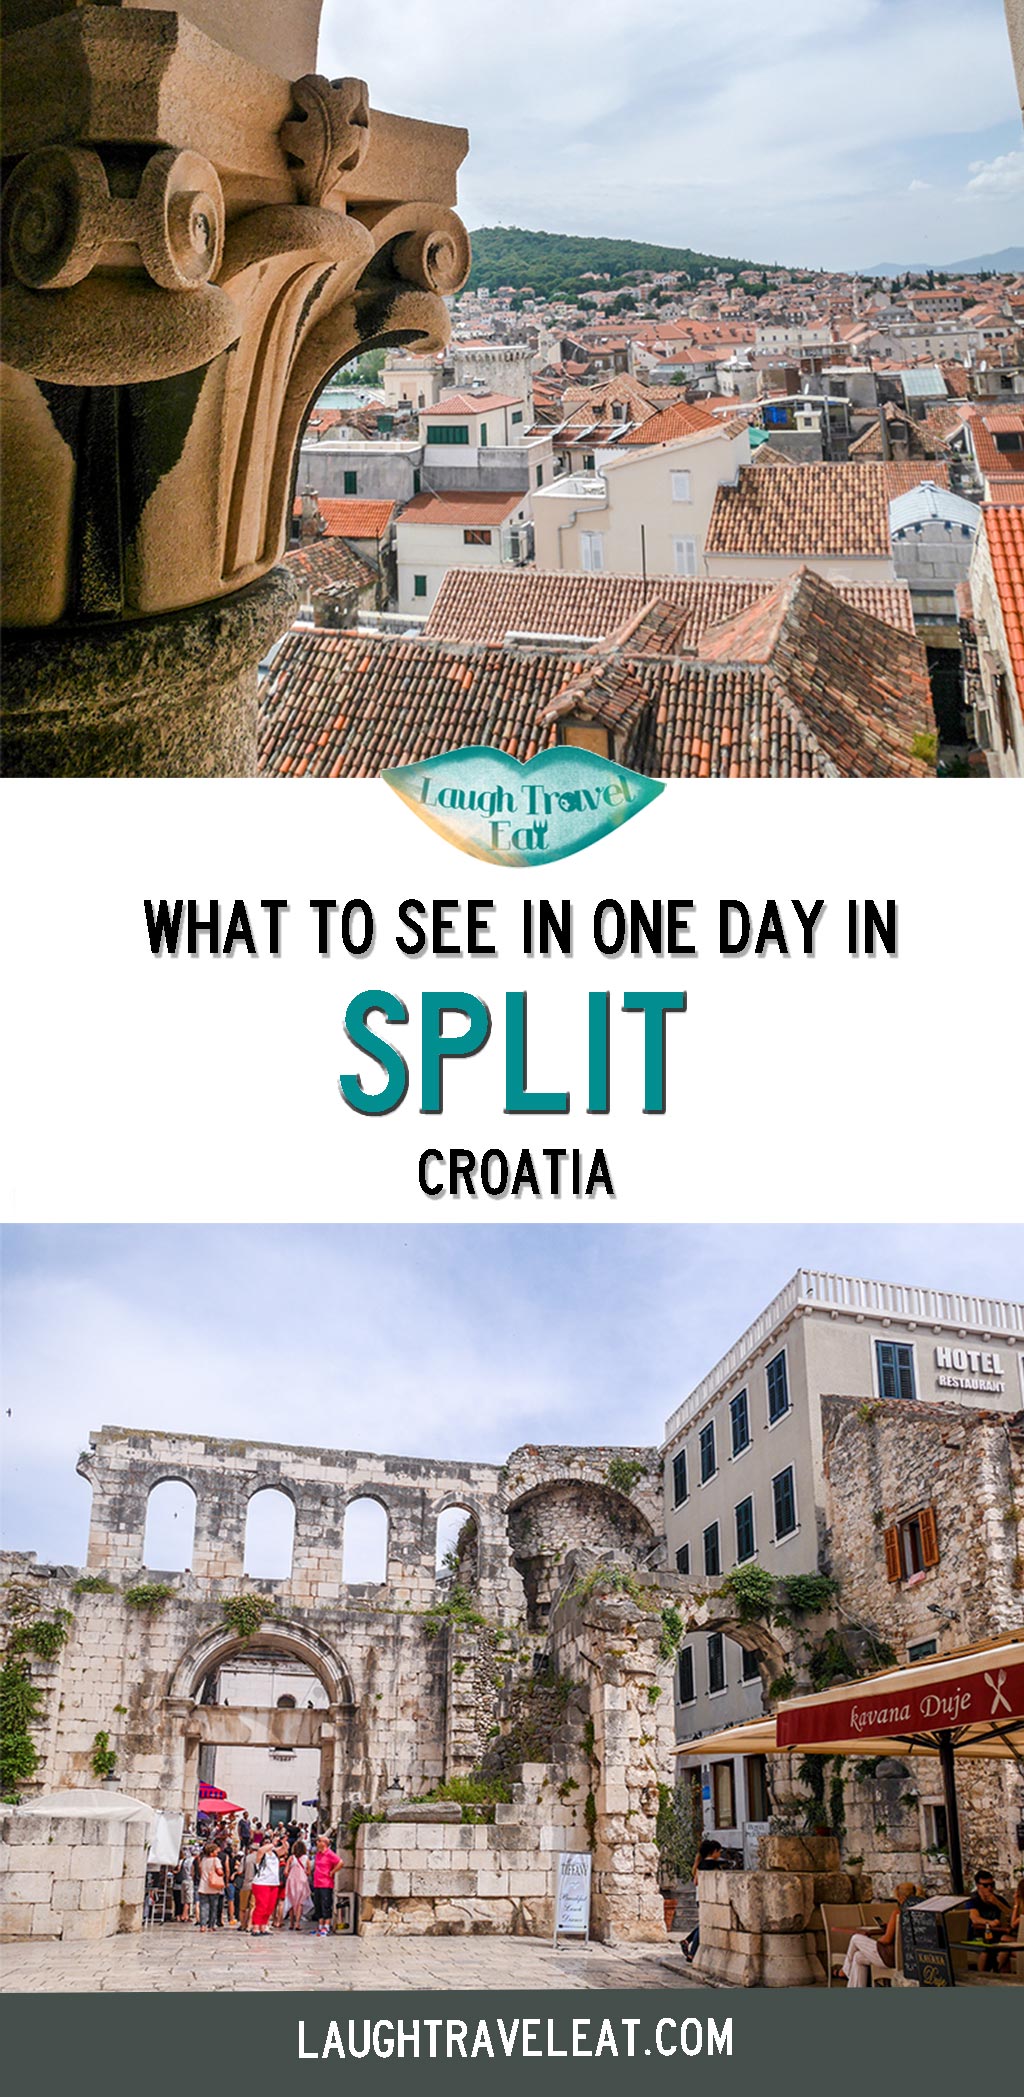 Split was home to a famous Roman Empire, and later a refuge place for many. It might be small, but there's certainly a lot to do and see in this Croatia seaside city #Split #Croatia